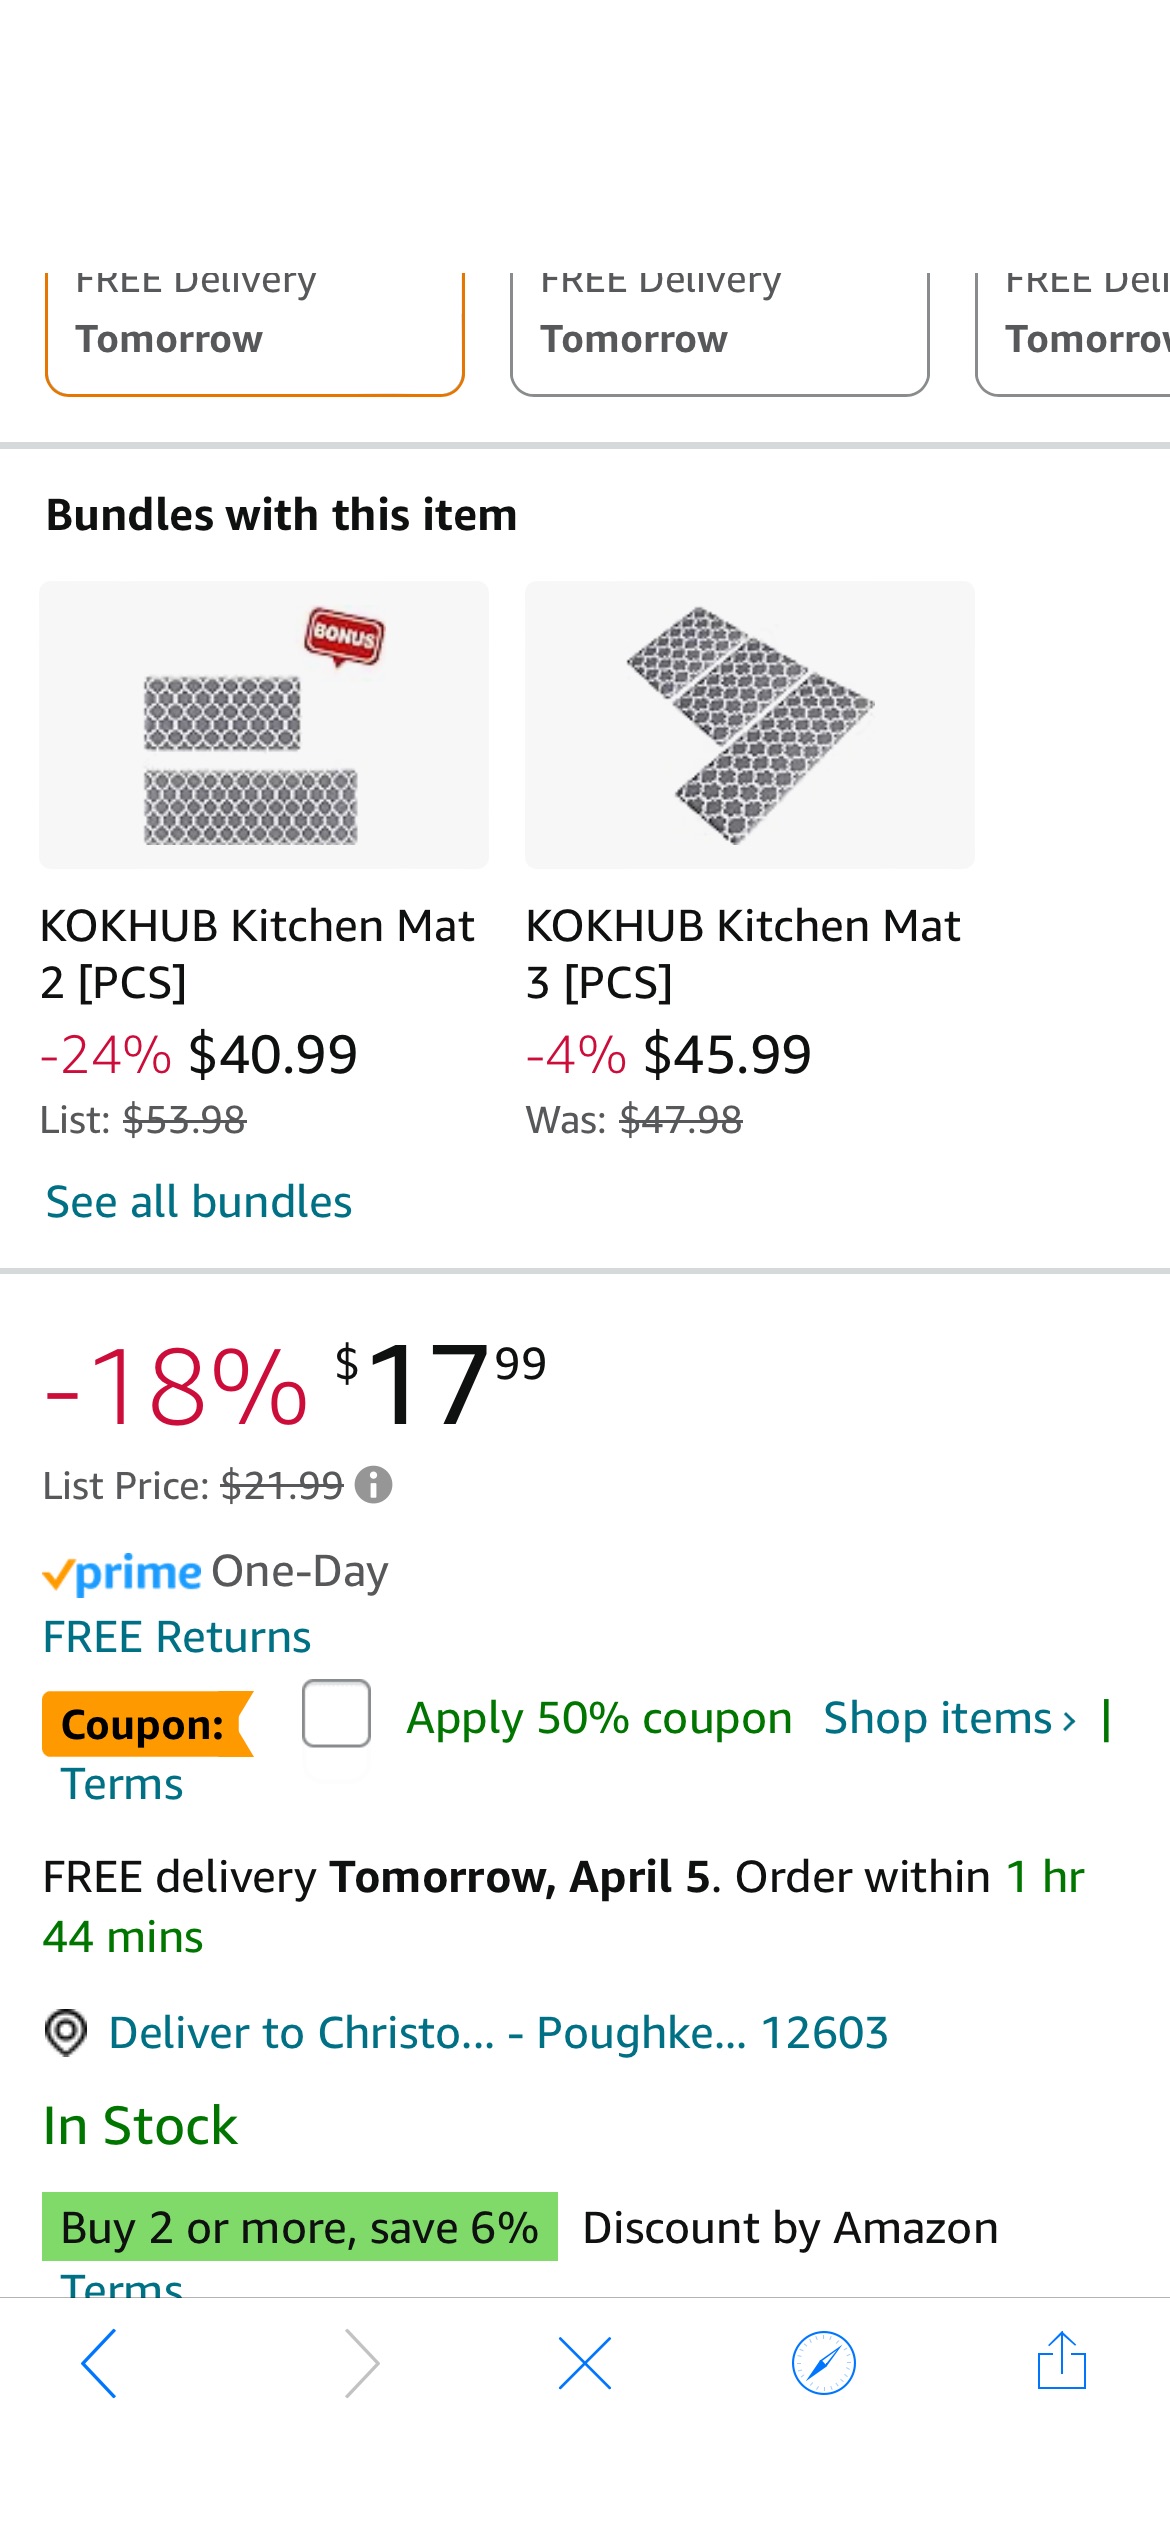 Amazon.com: KOKHUB Kitchen Mat,1/2 Inch Thick Cushioned Anti Fatigue Waterproof Kitchen Rug, Comfort Standing Desk Mat, Kitchen Floor Mat Non-Skid & Washable for Home, Office, Sink,17.3"x28"- Grey : H